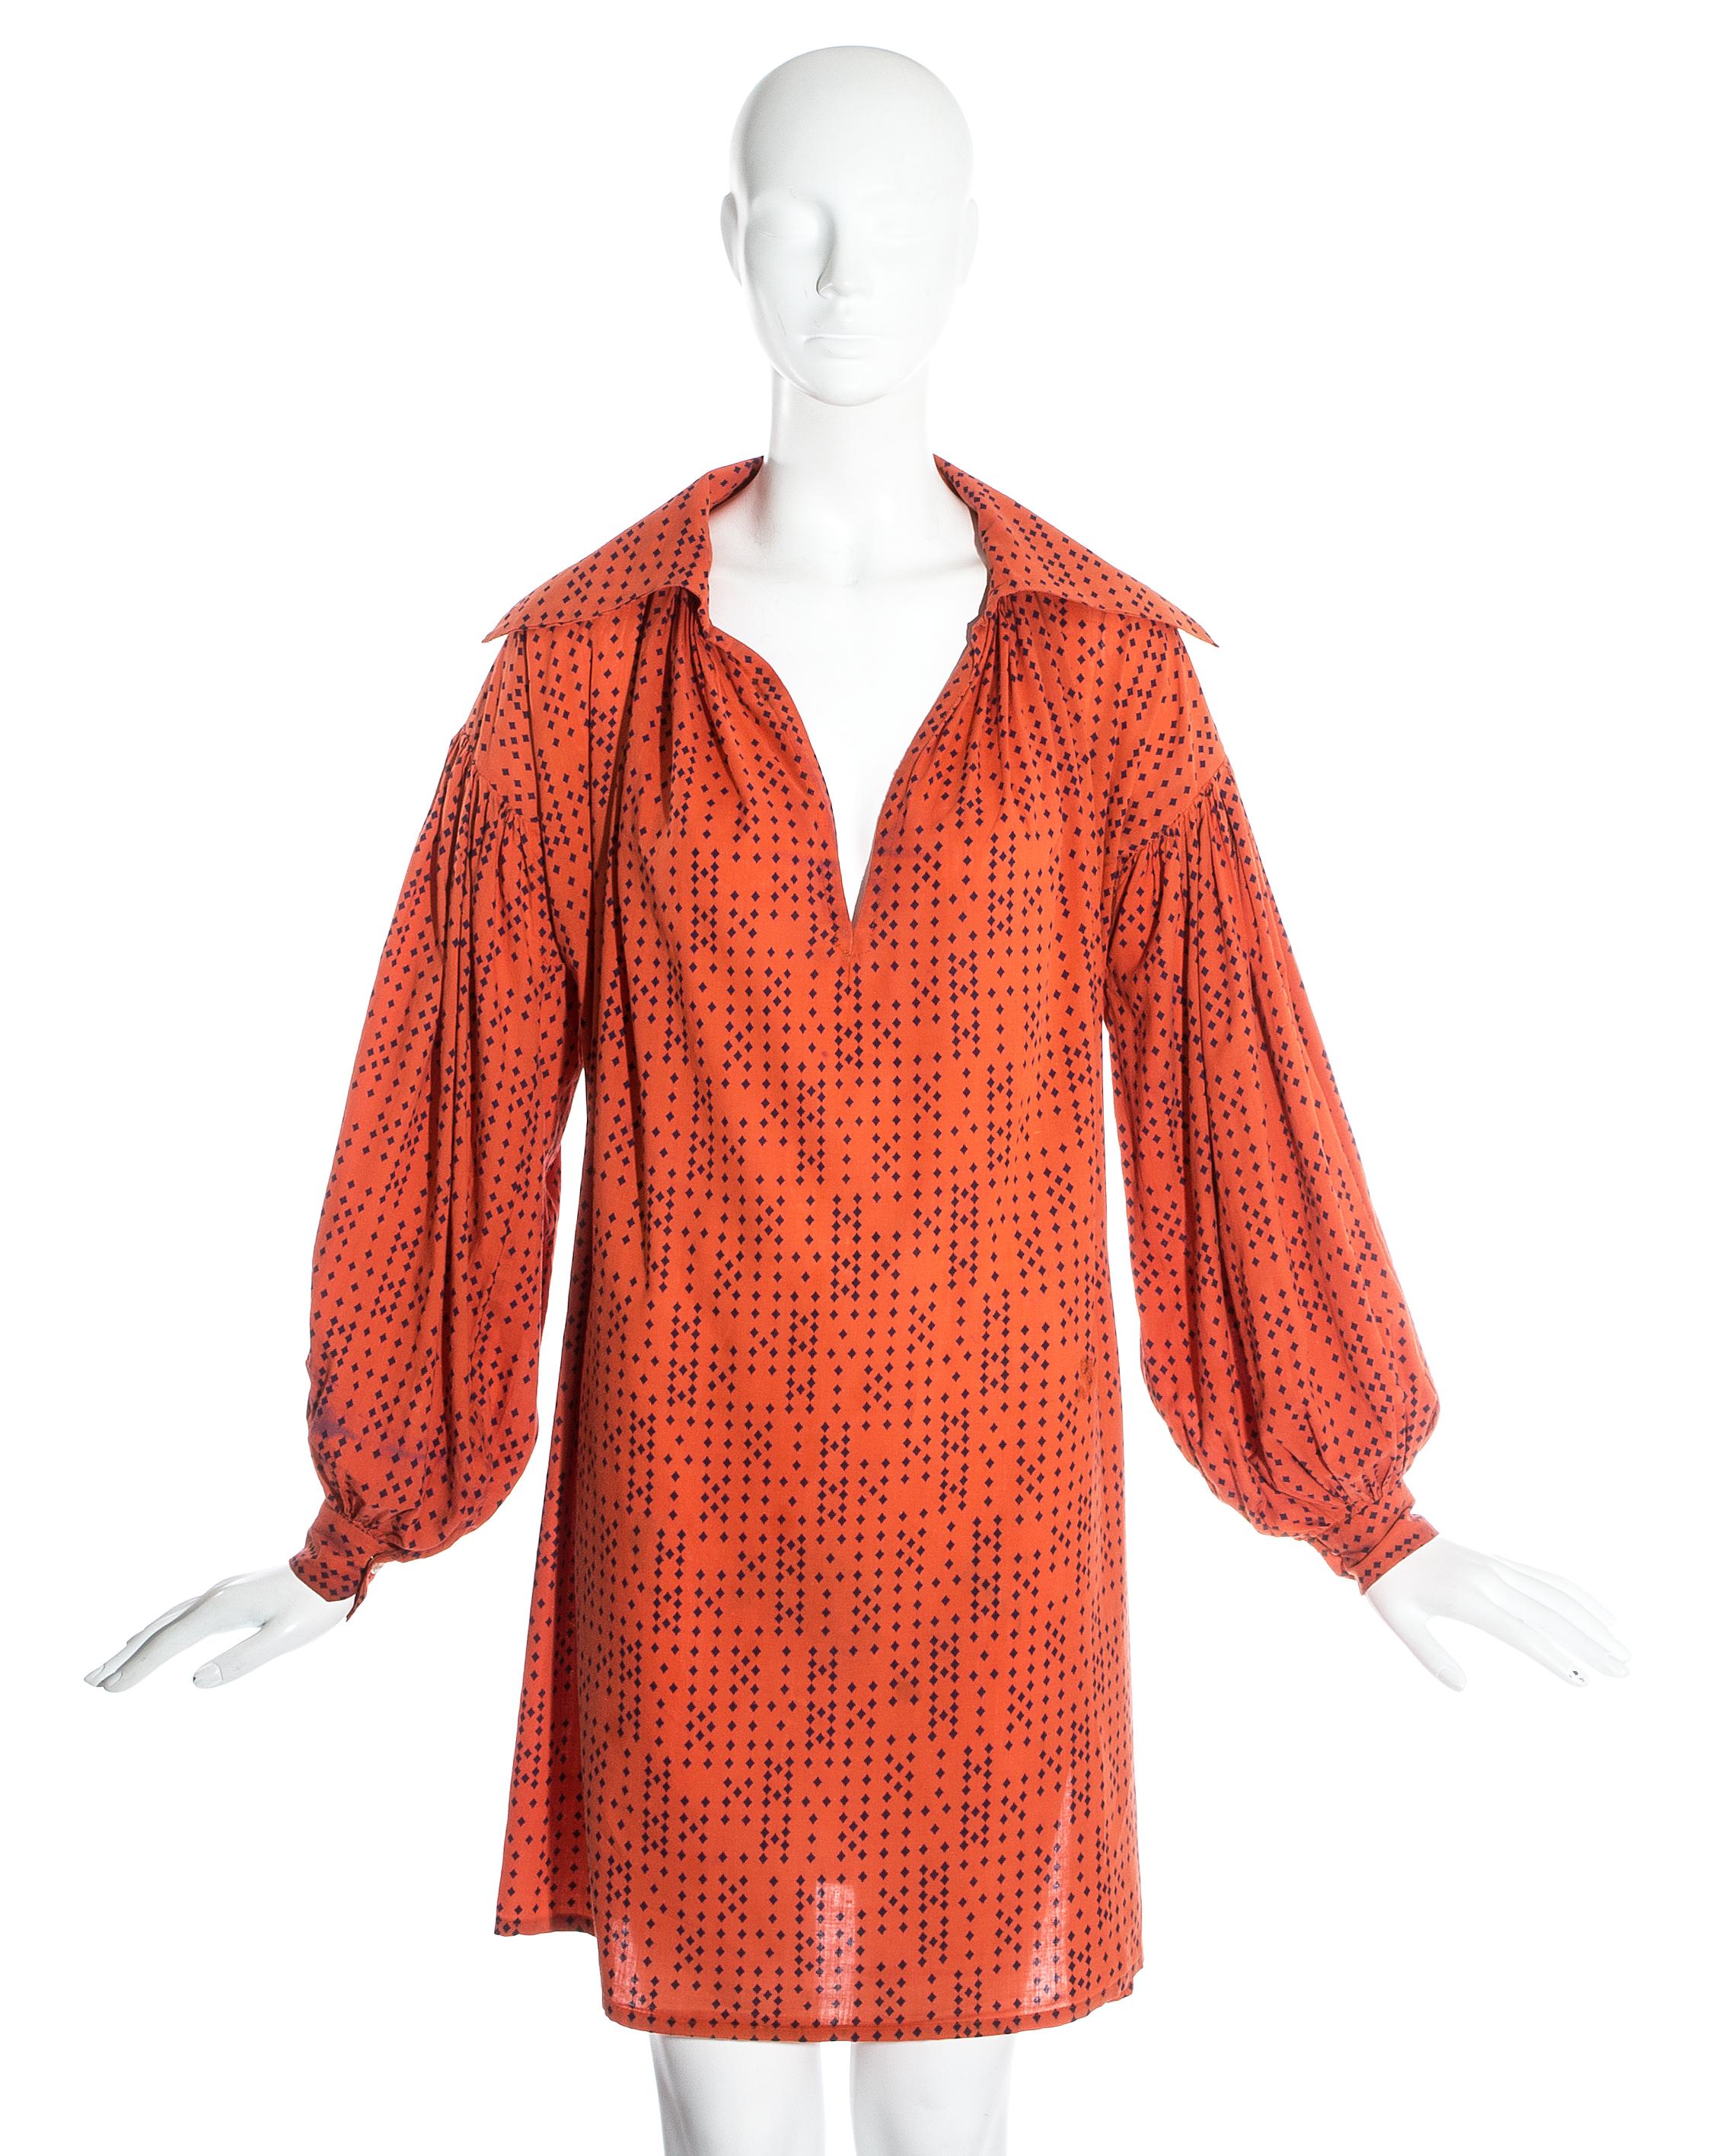 Worlds End by Vivienne Westwood and Malcolm McLaren; orange cotton oversized blouse.

'Pirates' Fall-Winter 1981